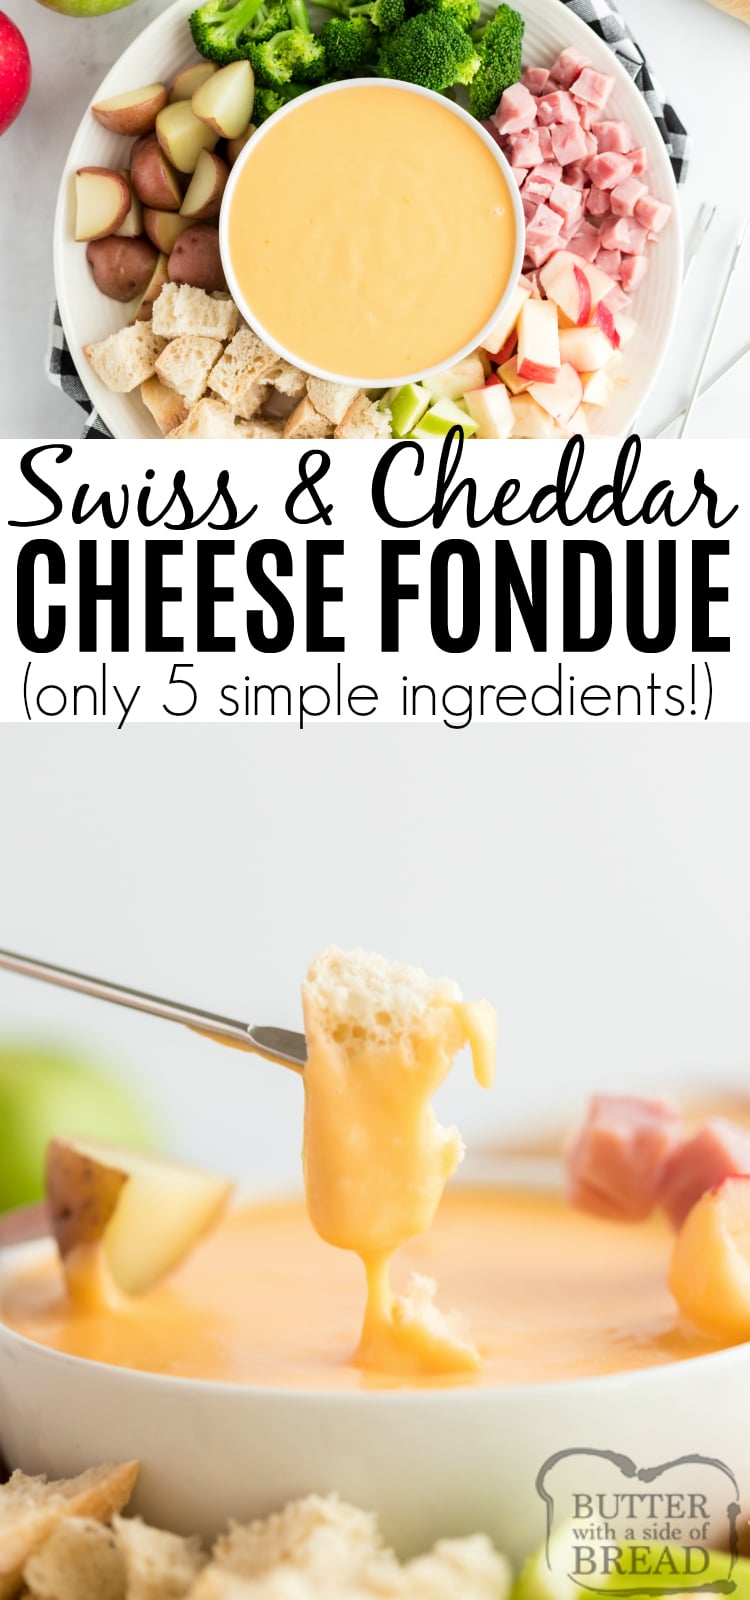 Swiss & Cheddar Cheese fondue is an easy appetizer recipe that is perfect for holiday dinners, parties and family gatherings! This delicious fondue recipe comes together in just a few minutes with a few simple ingredients - it is so easy to make and everyone loves it!